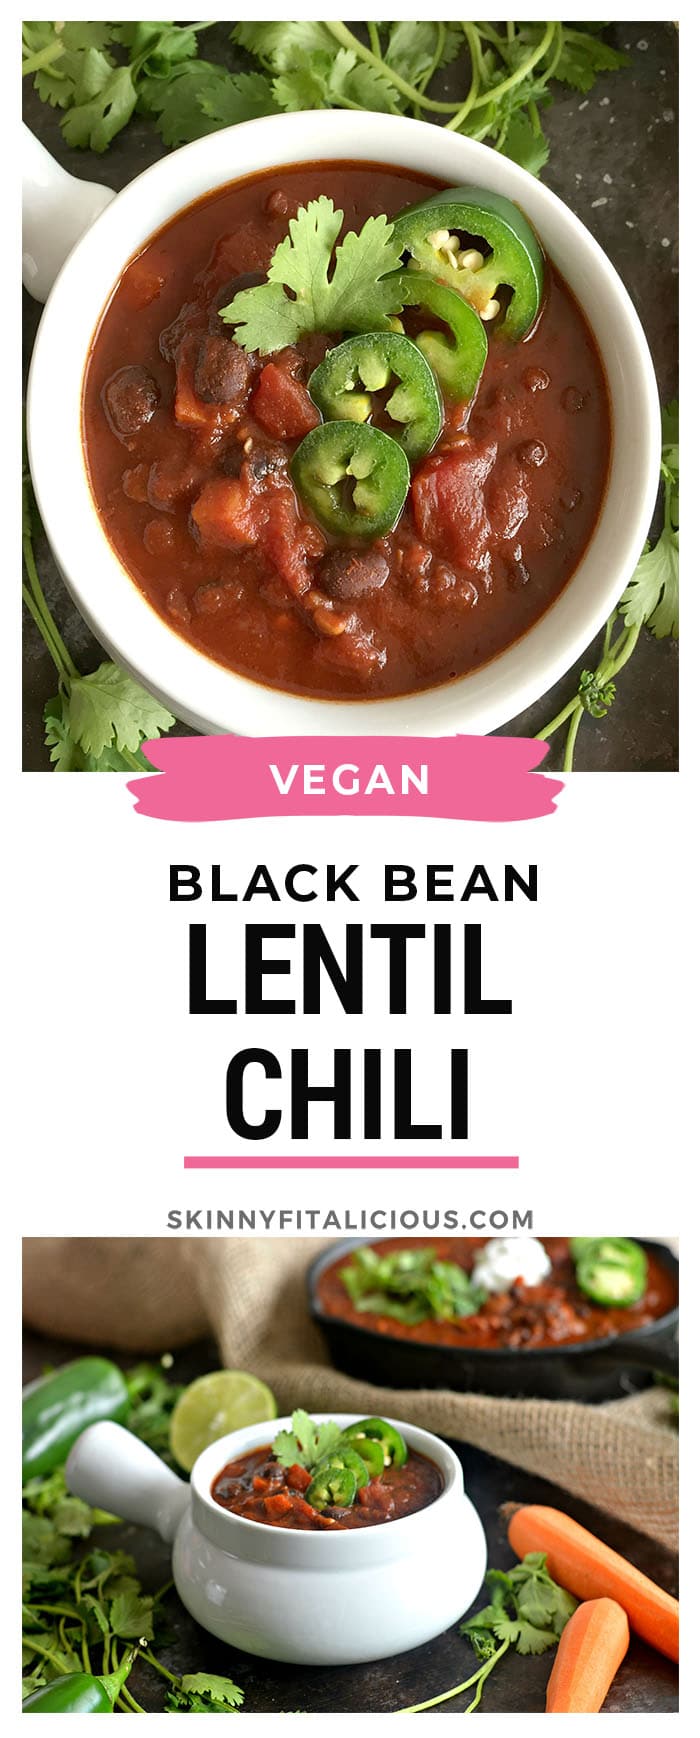 This Smoky Black Bean Lentil Chili is a hearty and healthy meal. Seasoned with jalapeño and smoky paprika, this makes the perfect comfort meal on a chilly winter day! 